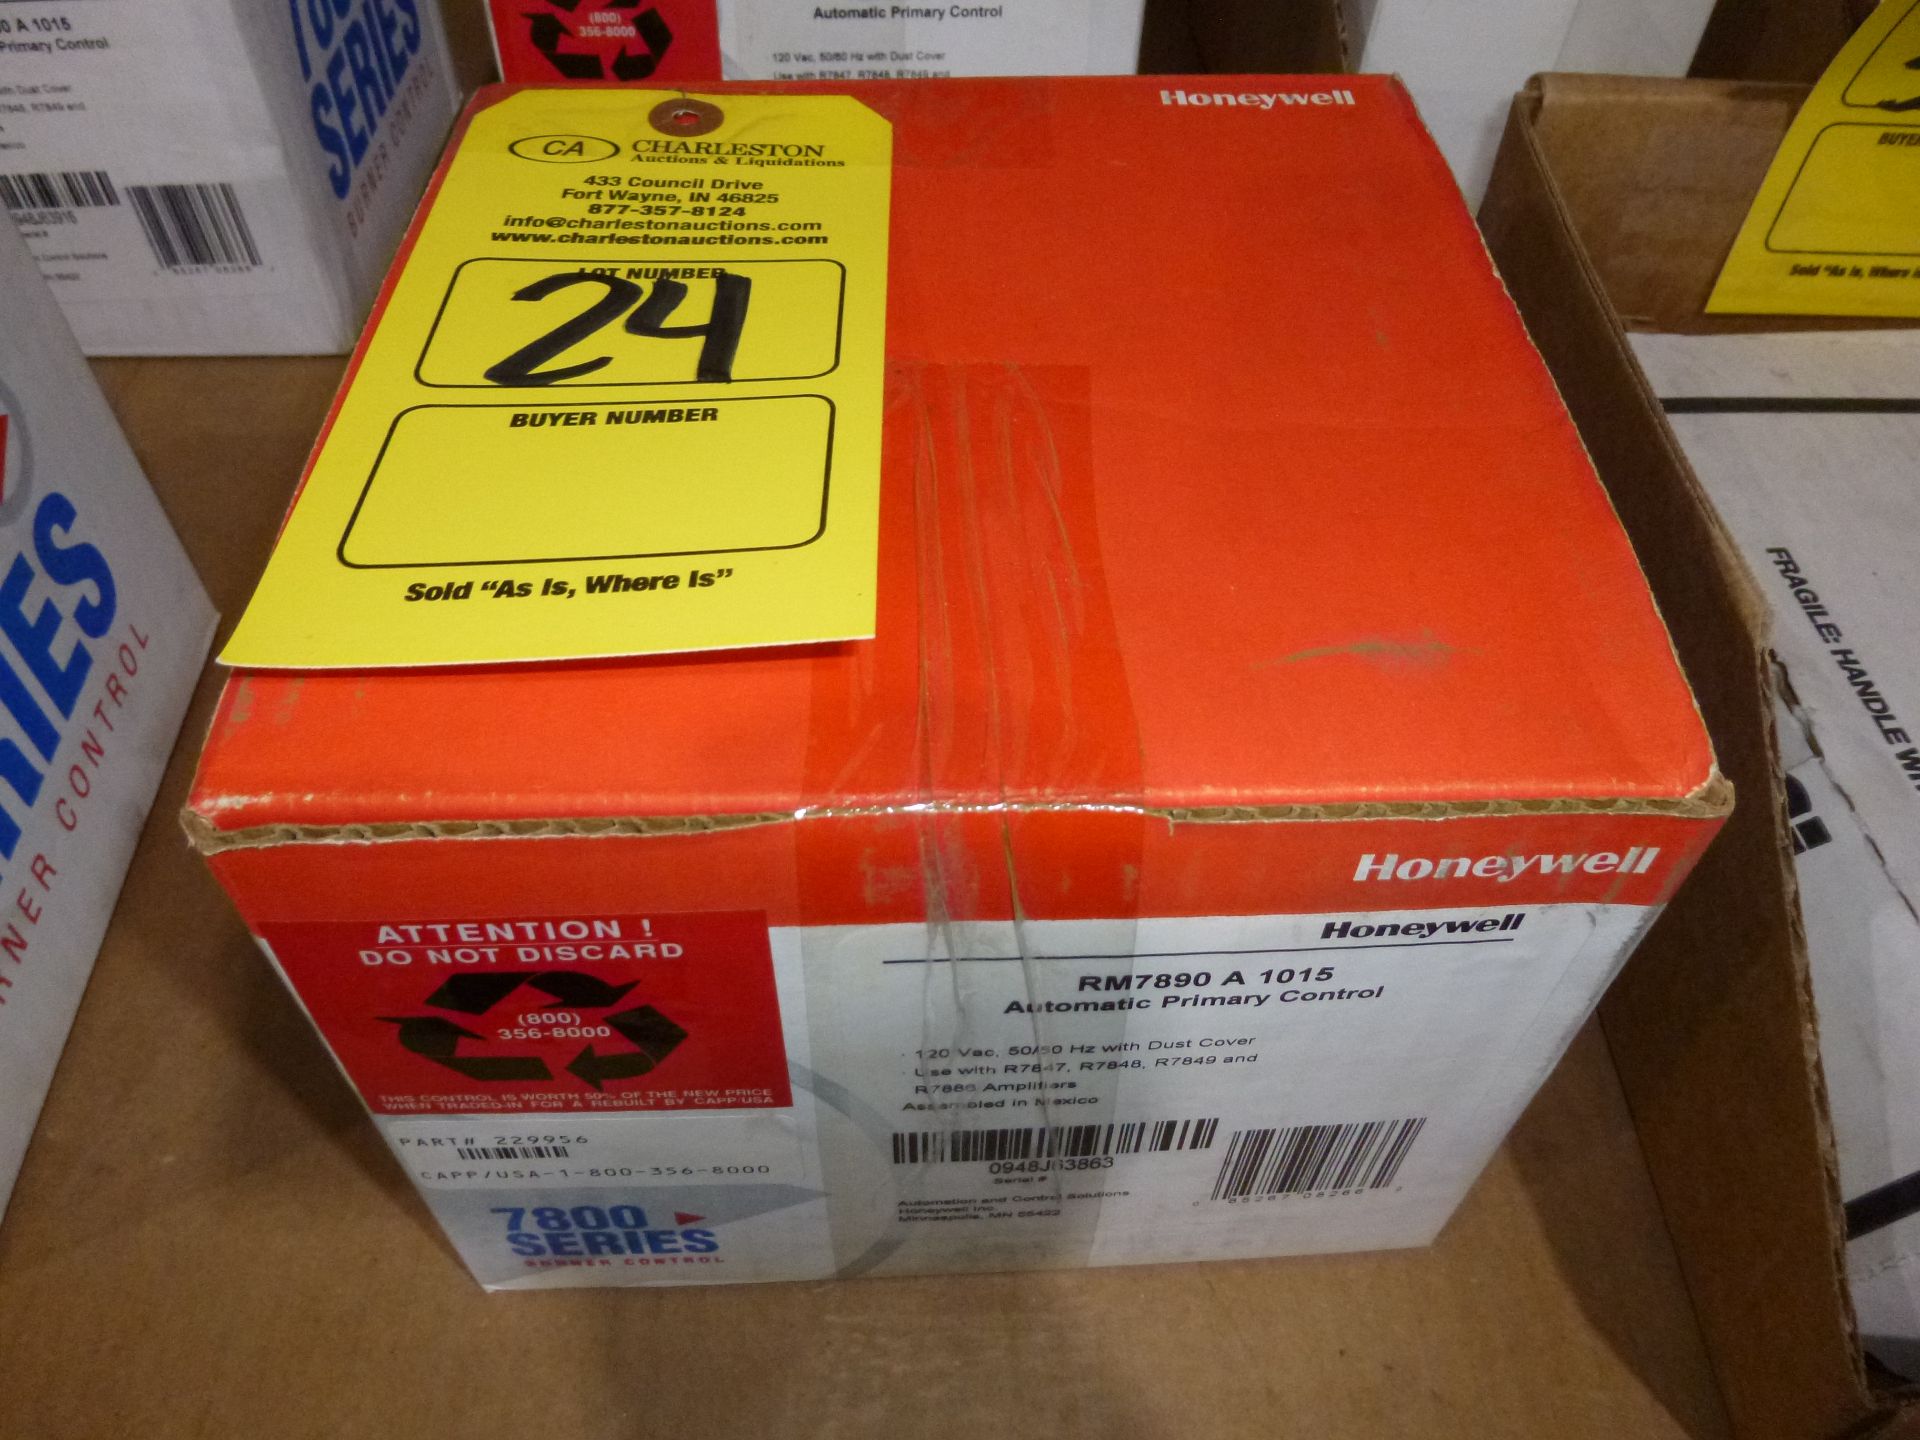 Honeywell RM7890-A-1015 automatic Primary Control, new in box, as always with Brolyn LLC auctions,